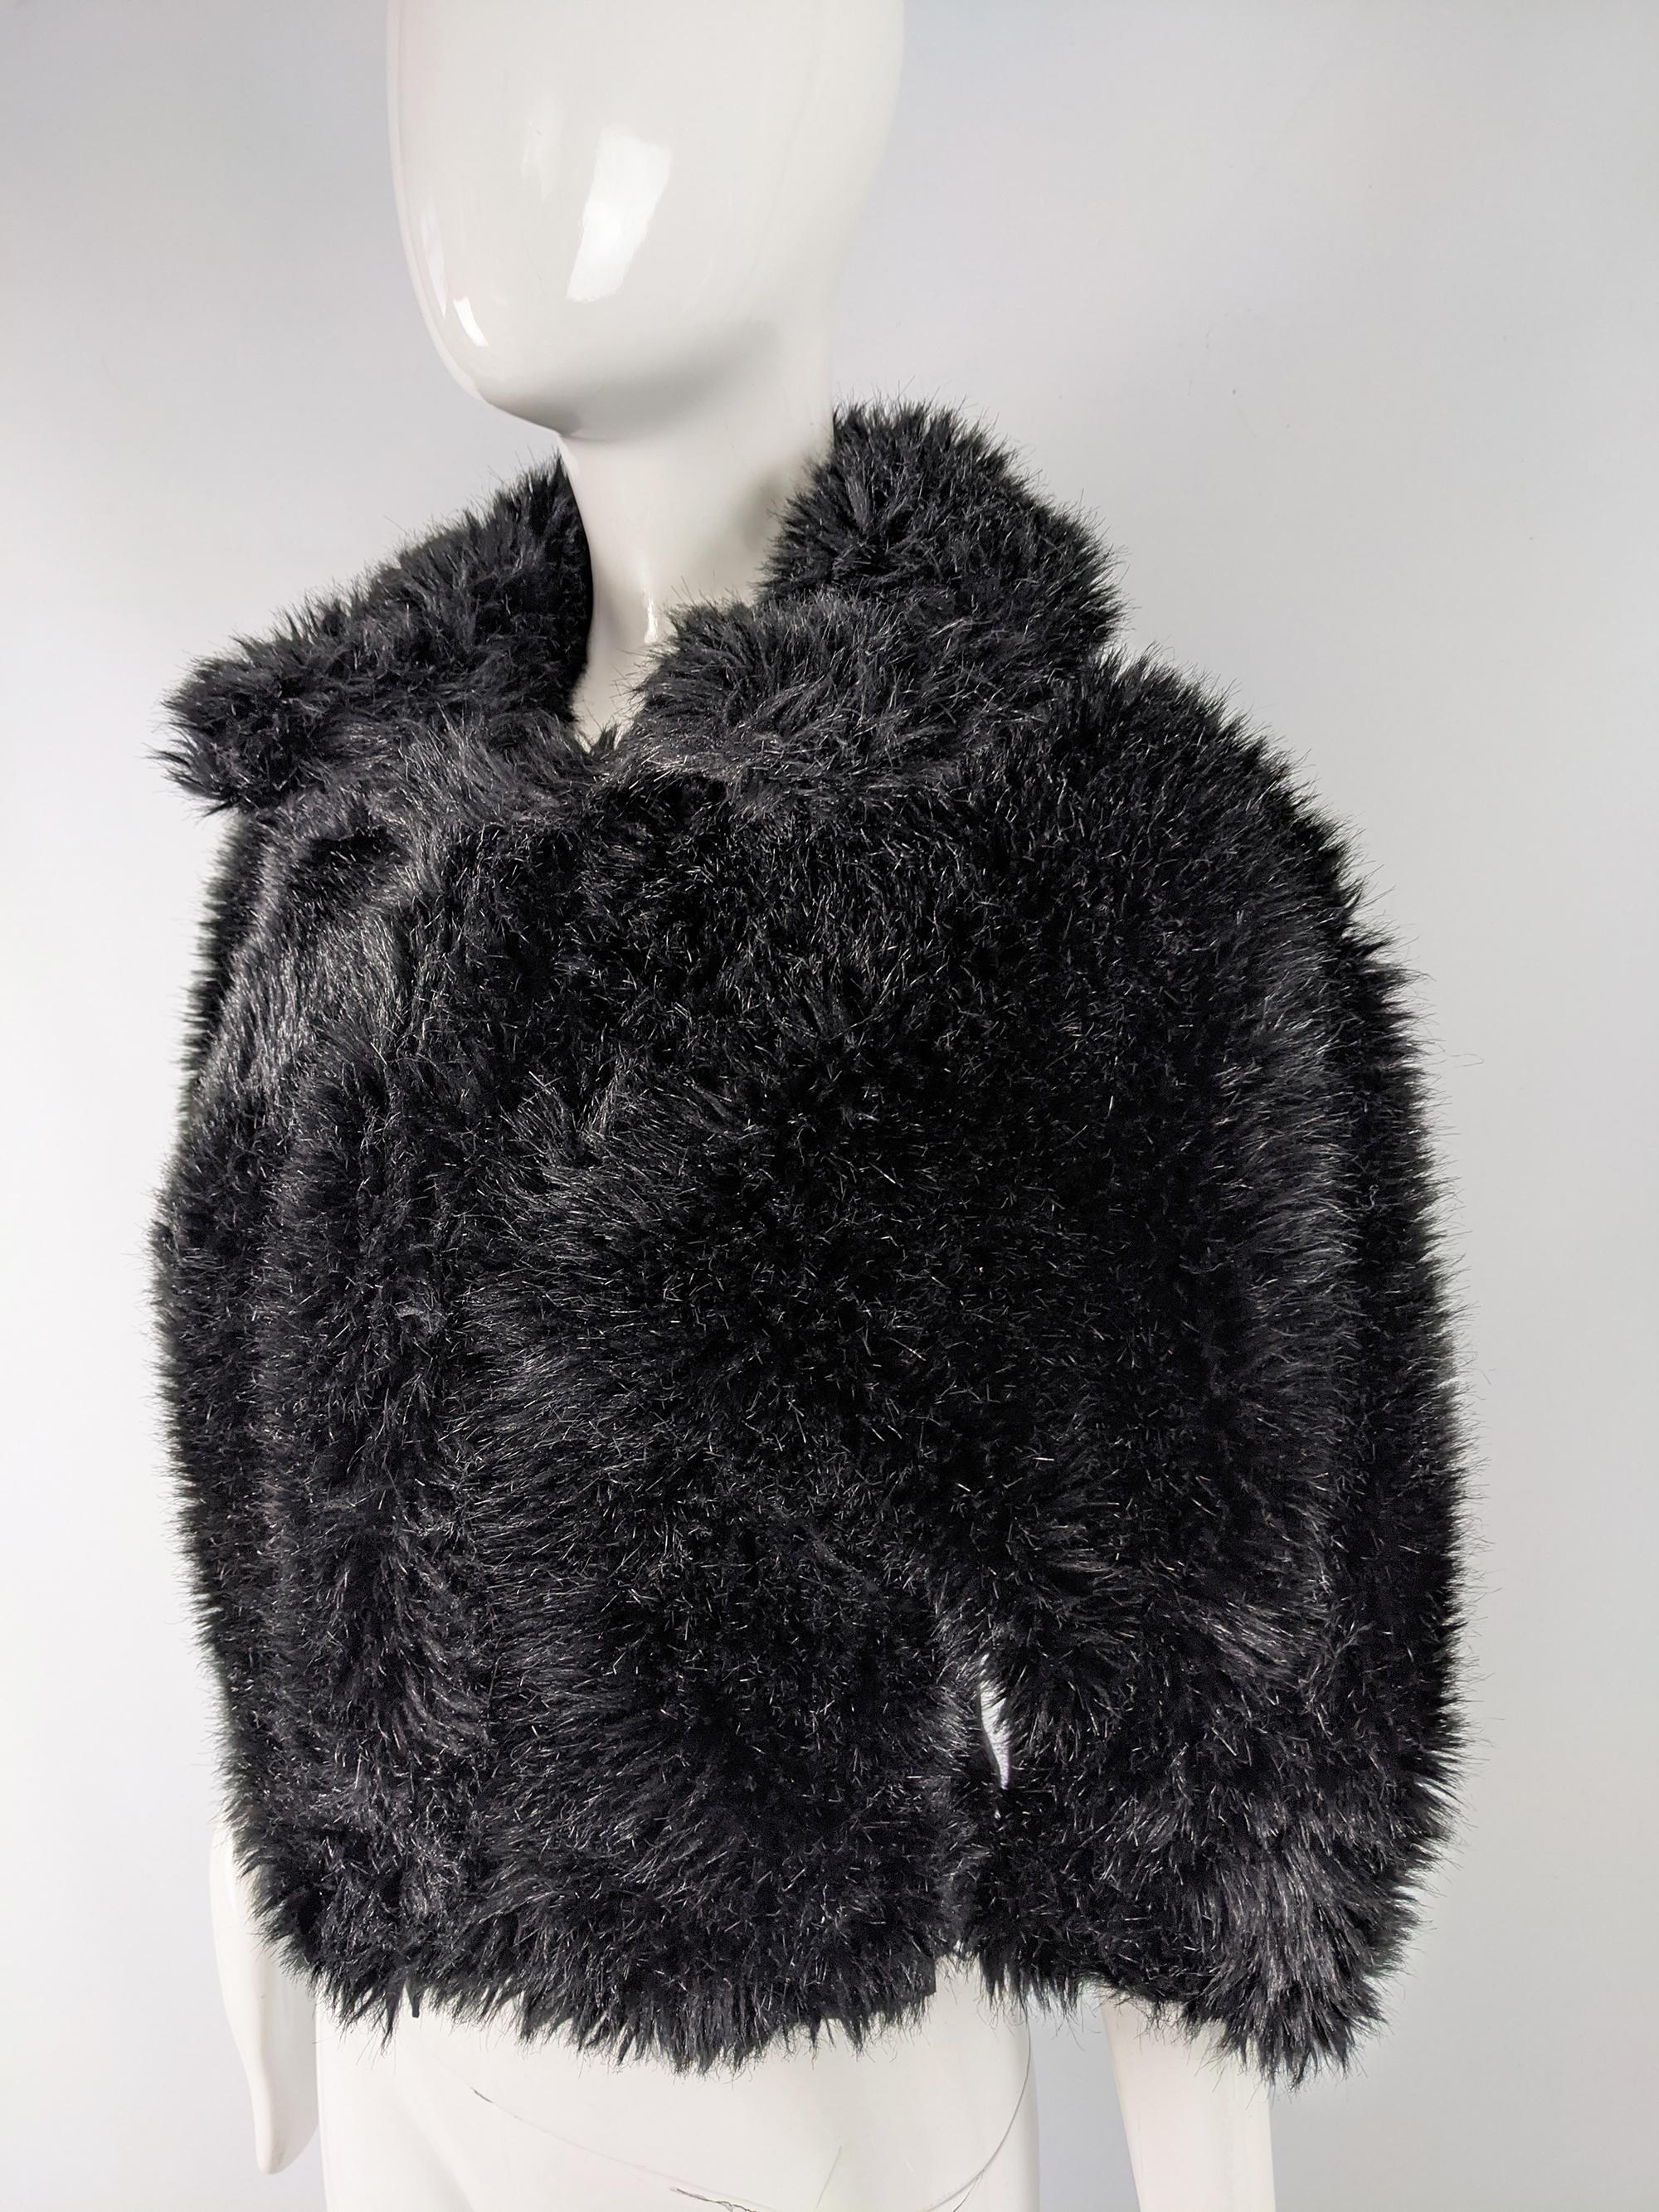 Nina Ricci Faux Fur Wool & Cashmere Jacket In Excellent Condition For Sale In Doncaster, South Yorkshire